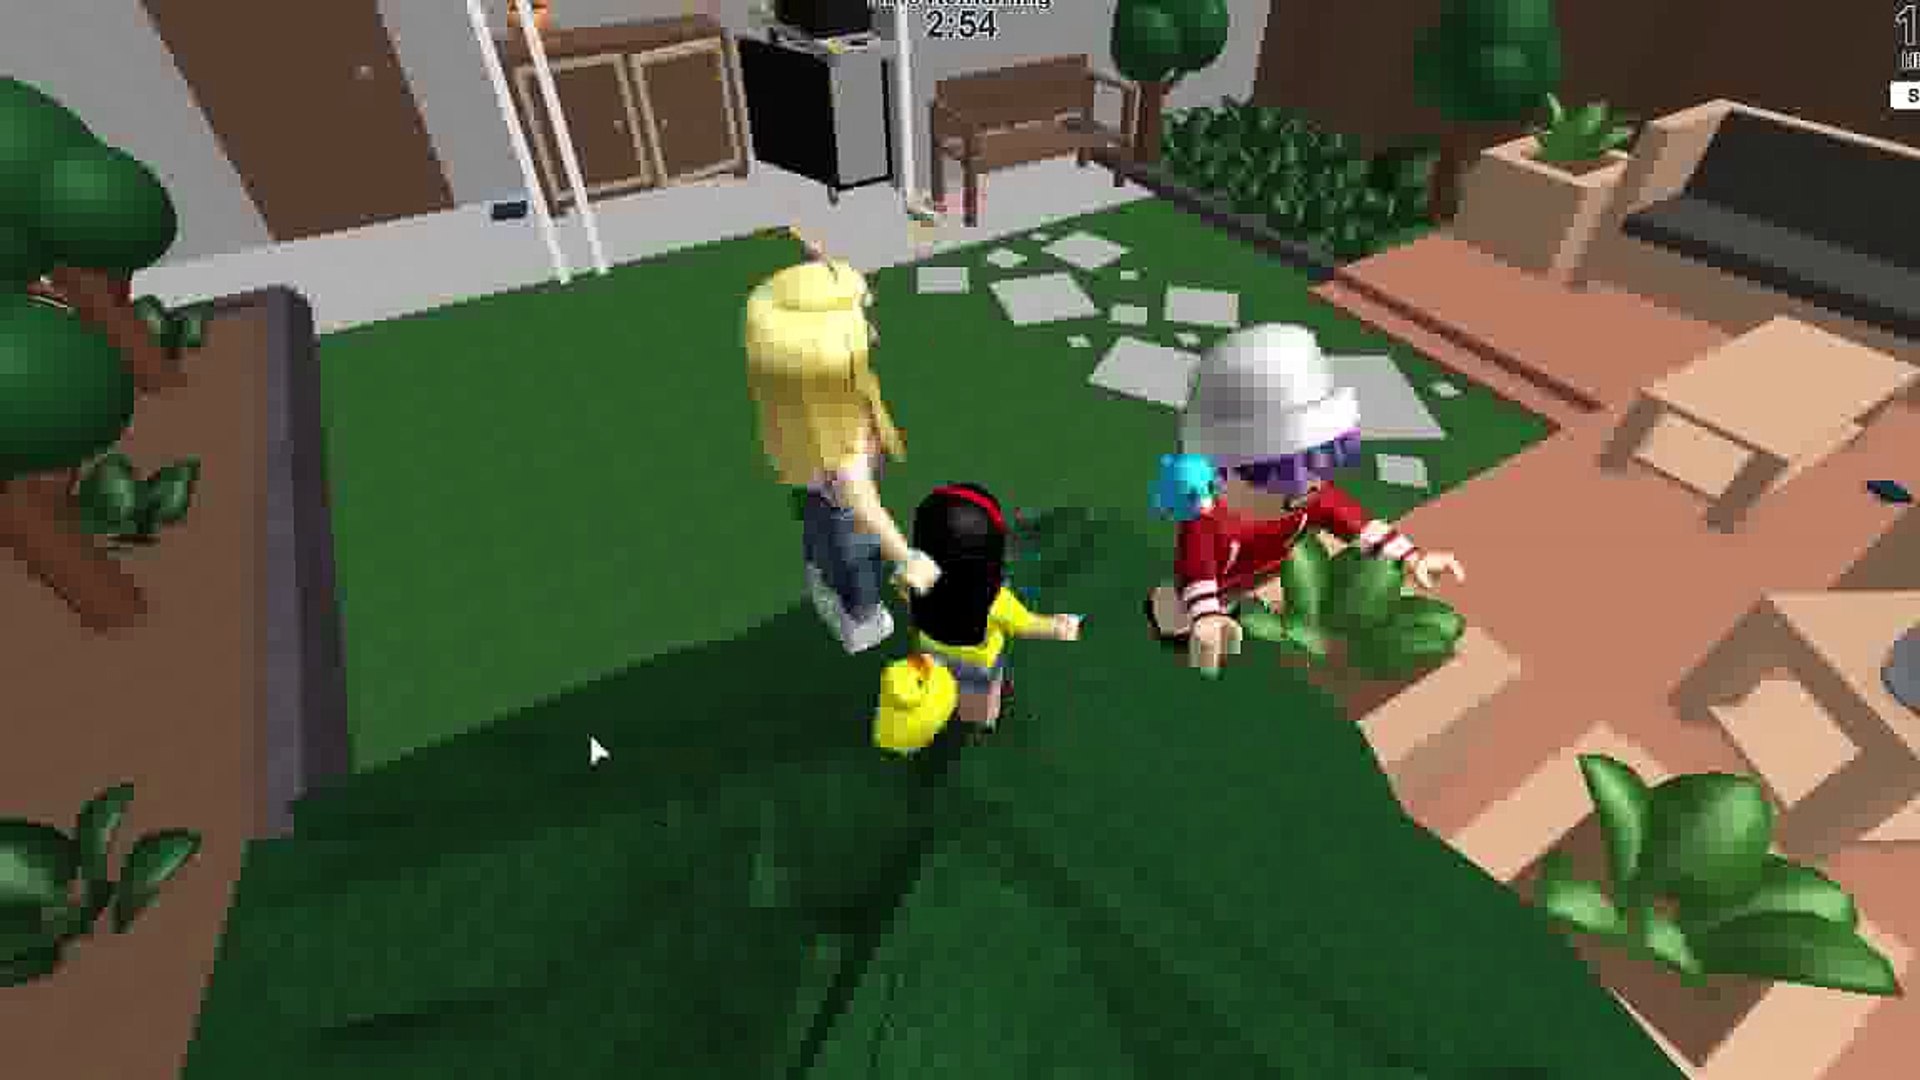 Roblox Extreme Hide And Seek Audrey Knows All The Secret Spots With Radiojh Games Au Dailymotion Video - roblox extreme hide and seek audrey knows all the secret spots with radiojh games au